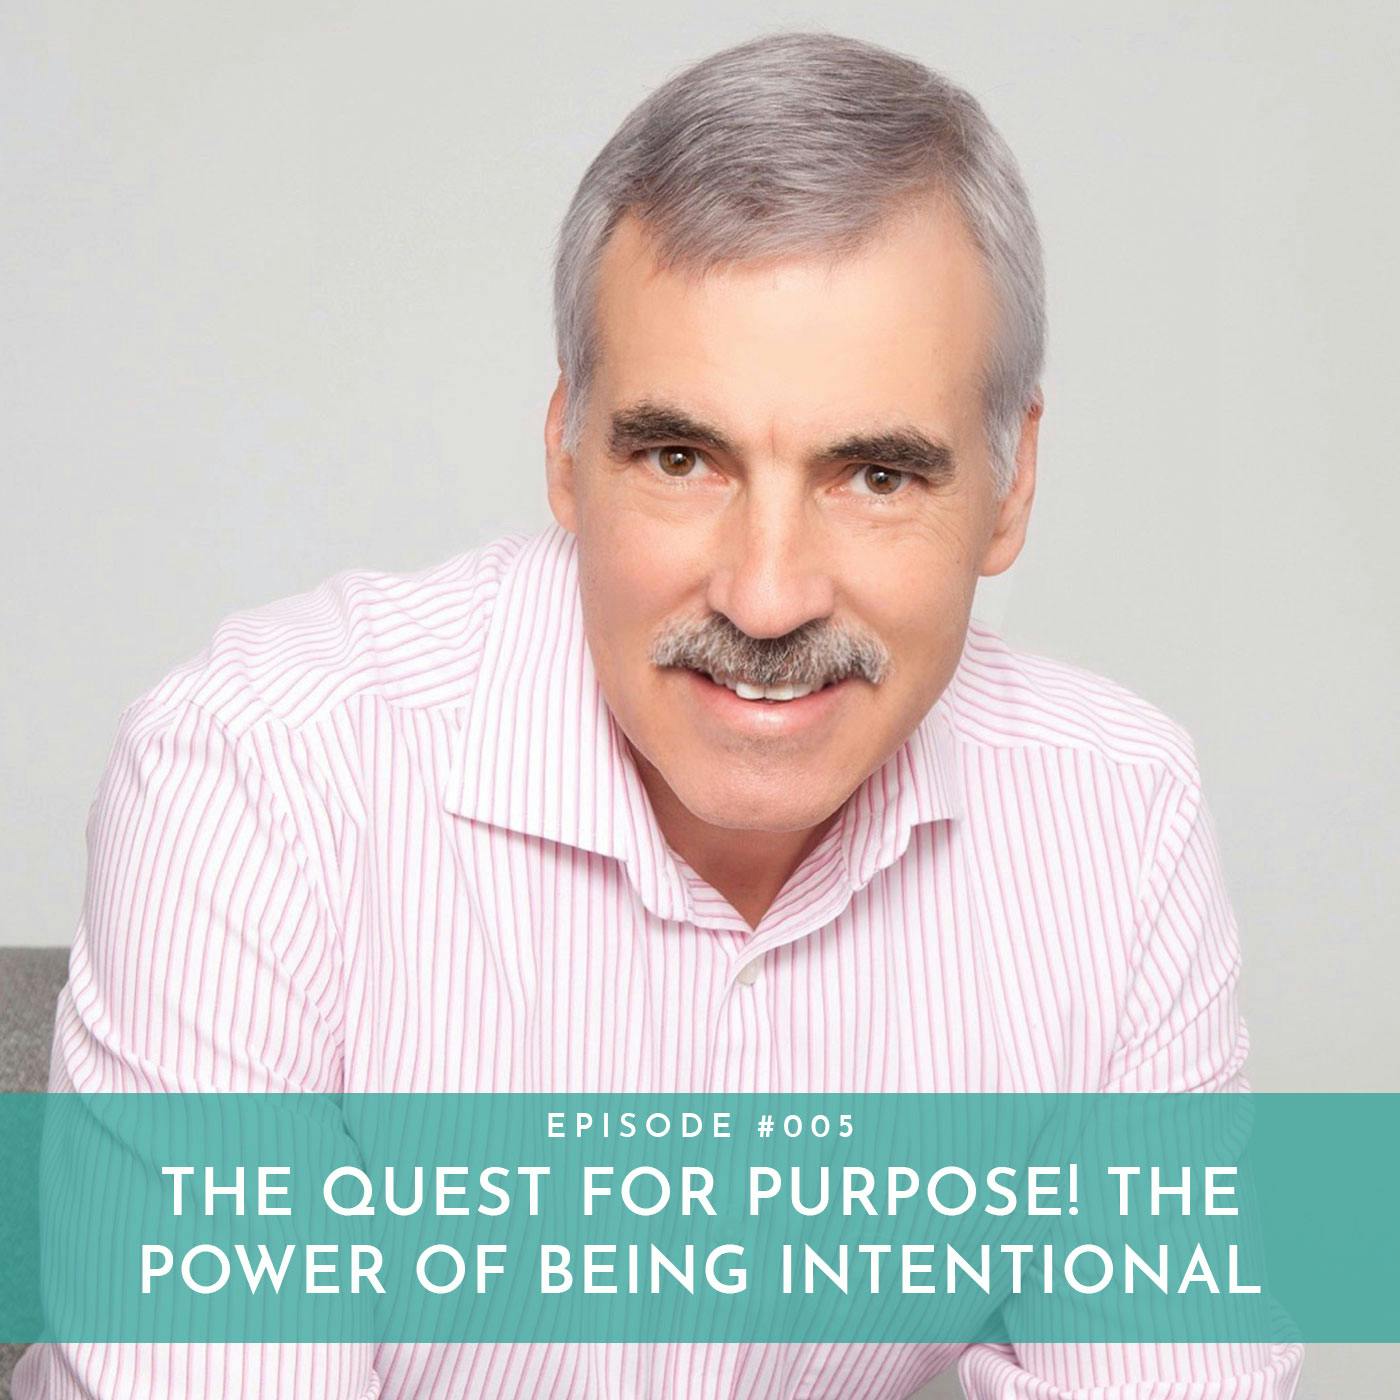 The Quest For Purpose! The Power of Being Intentional with Dr. Ken Keis, Ph.D